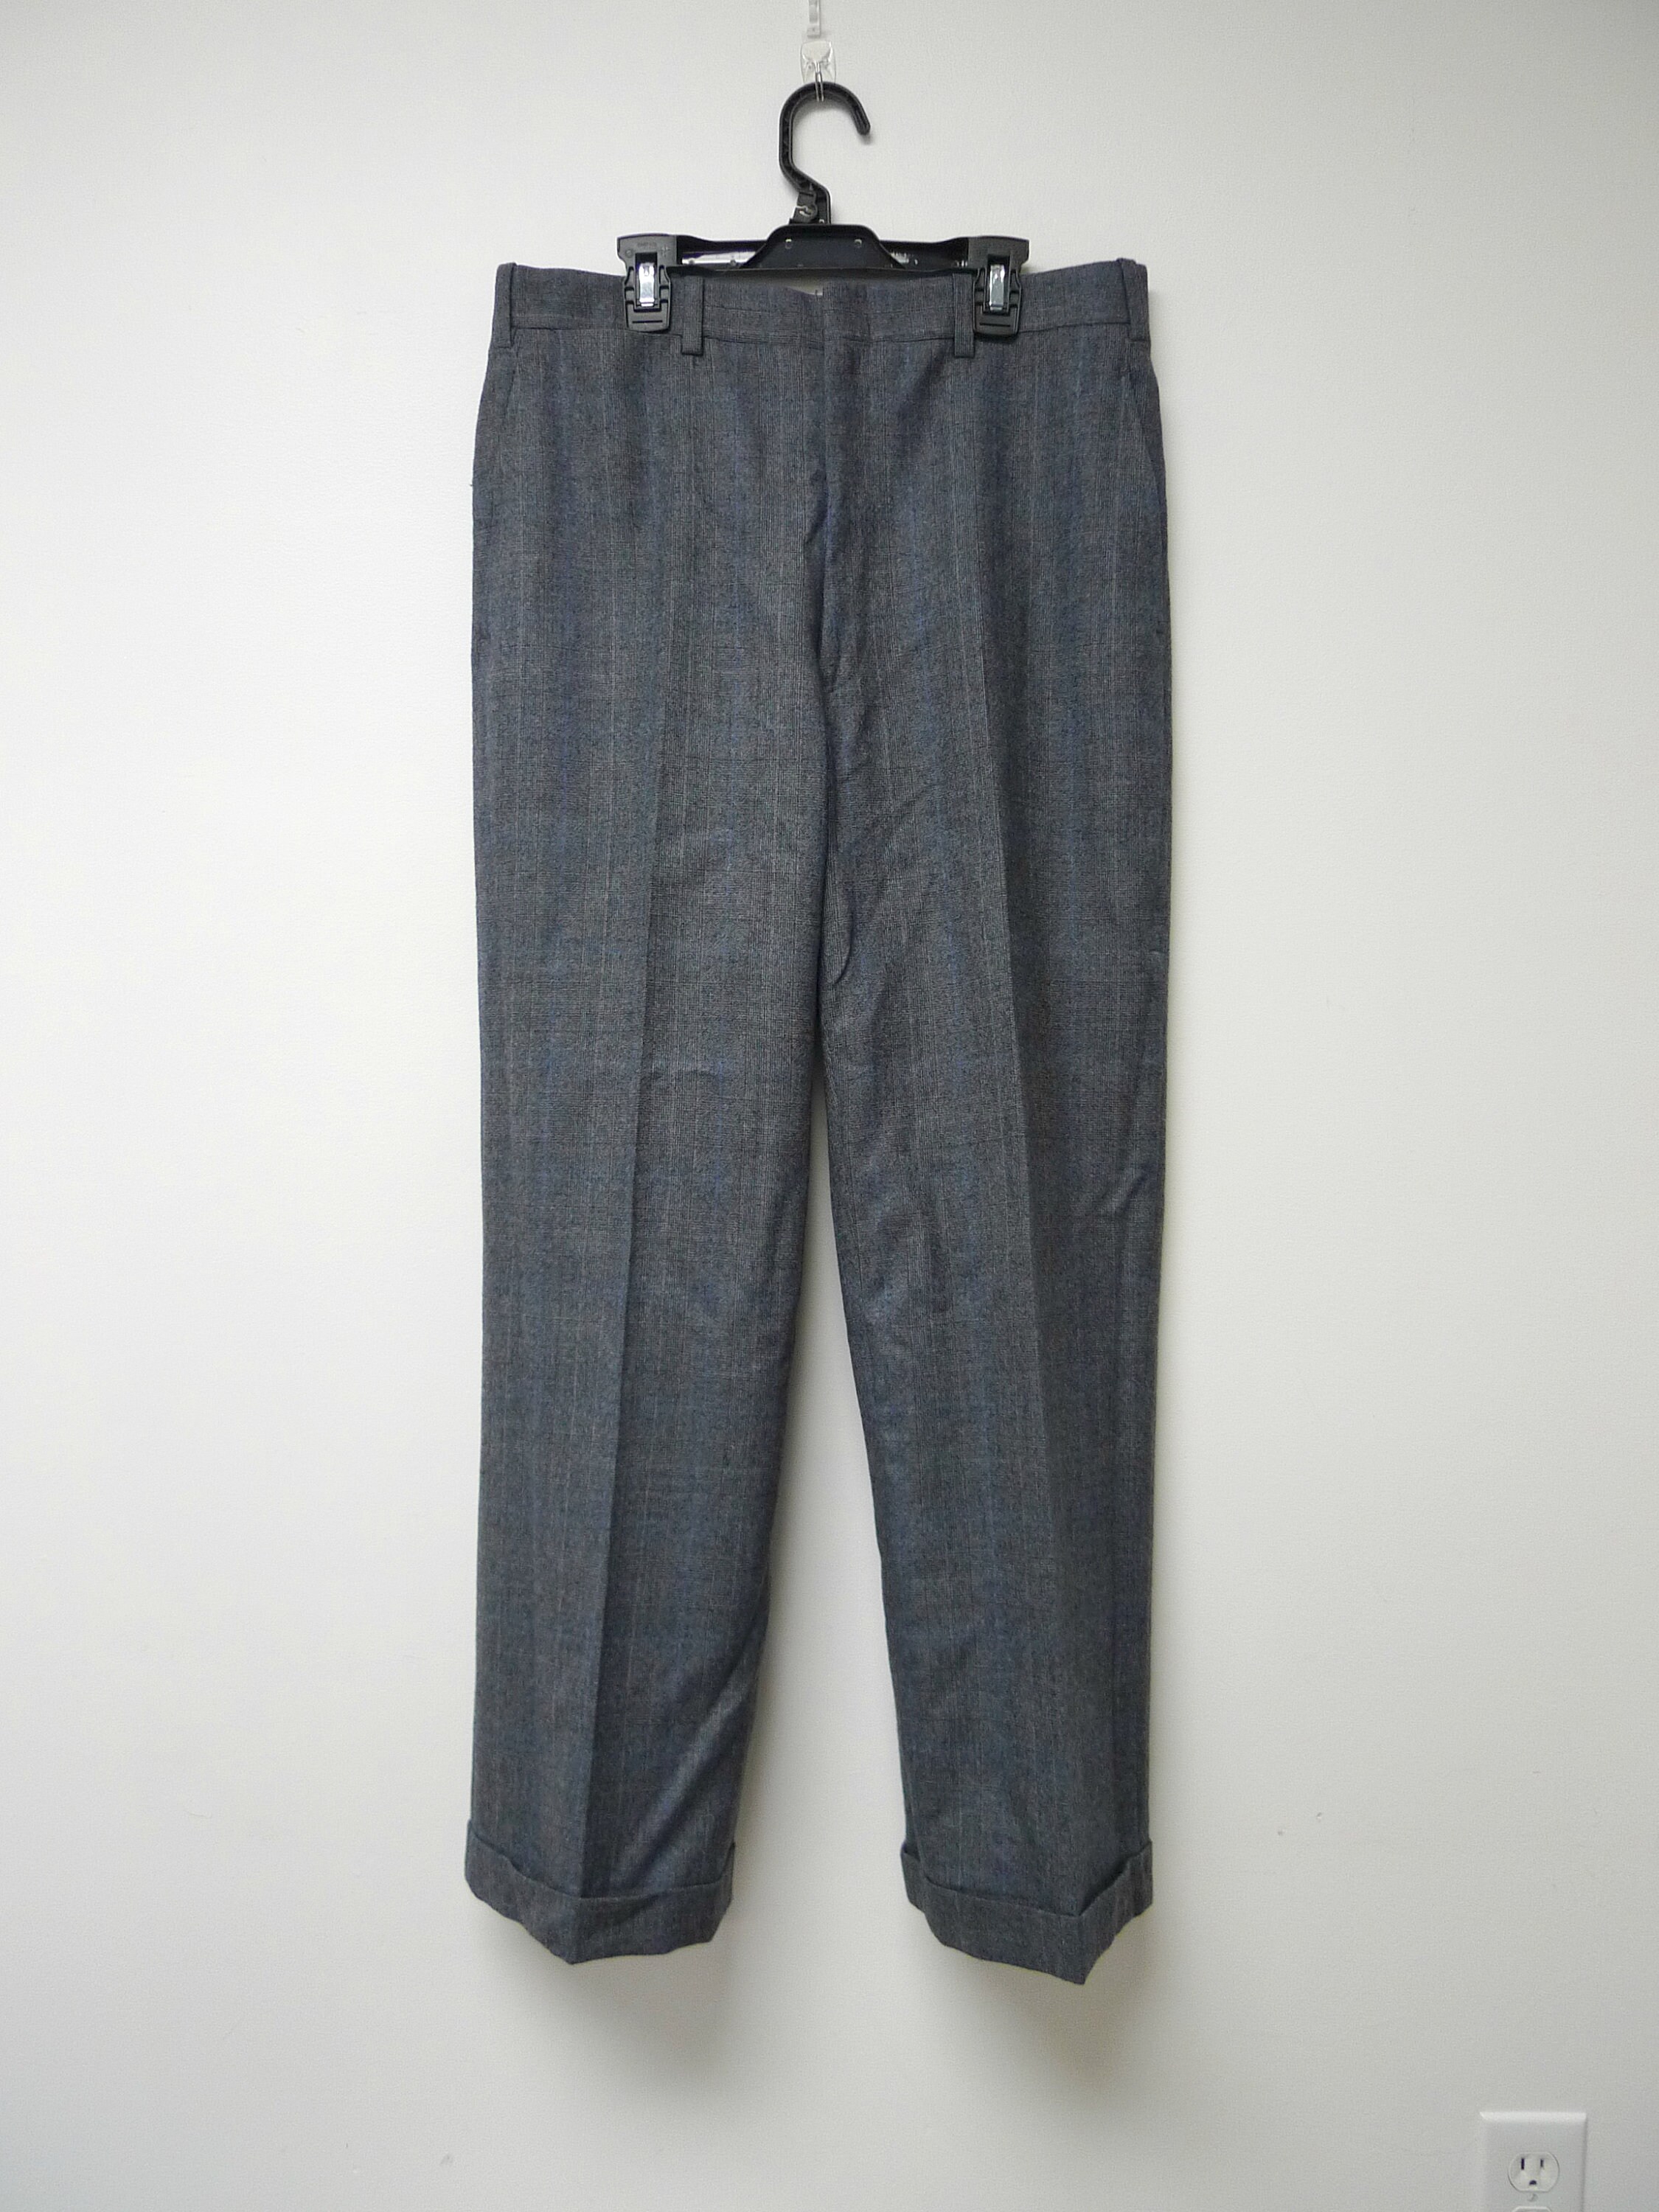 Glen Plaid Trousers With Belt Loops and Inside Brace Buttons . - Etsy